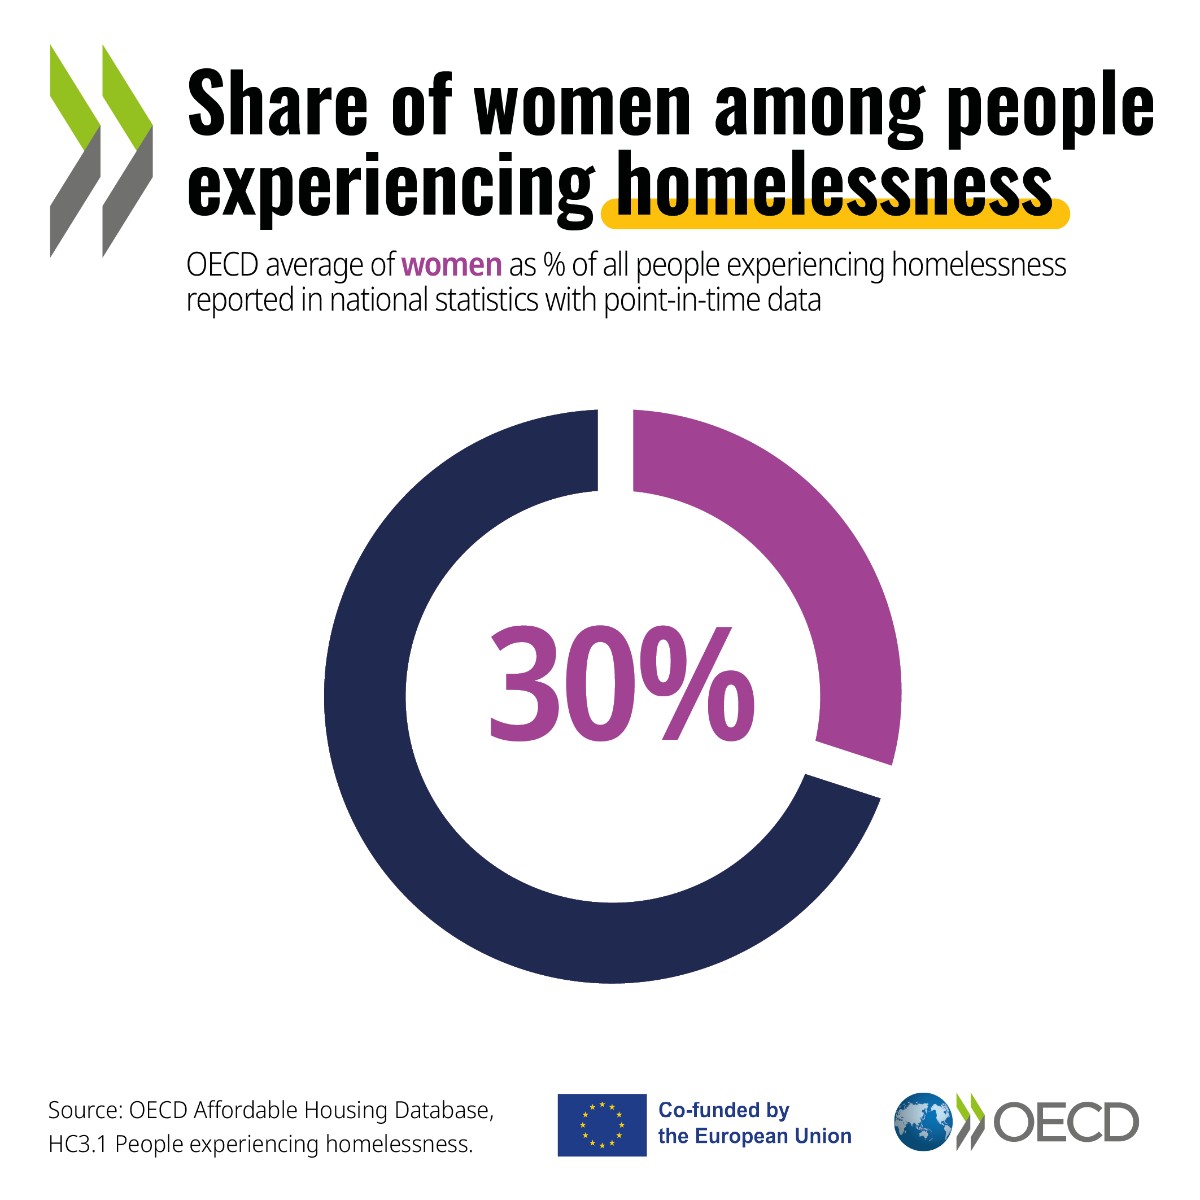 On average in the OECD, women account for just 30% of people experiencing #homelessness – but this is partly due to how homelessness is defined and counted. Find out more in the OECD Affordable Housing Database: brnw.ch/21wJNFp